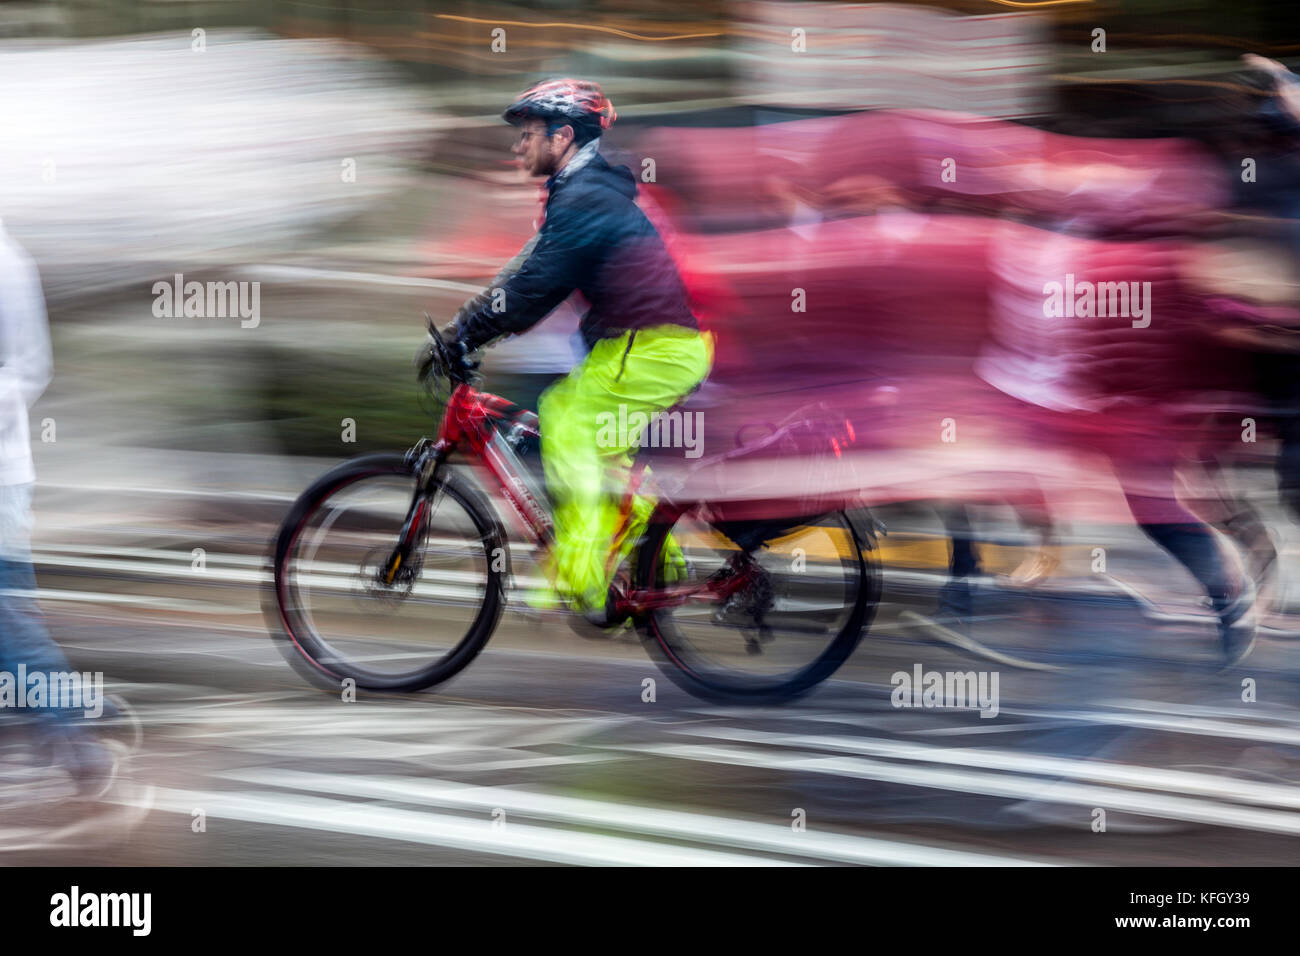 WA14183-00...WASHINGTON - Bicycle ridder on a wet day in down town Seattle. (No MR) Stock Photo